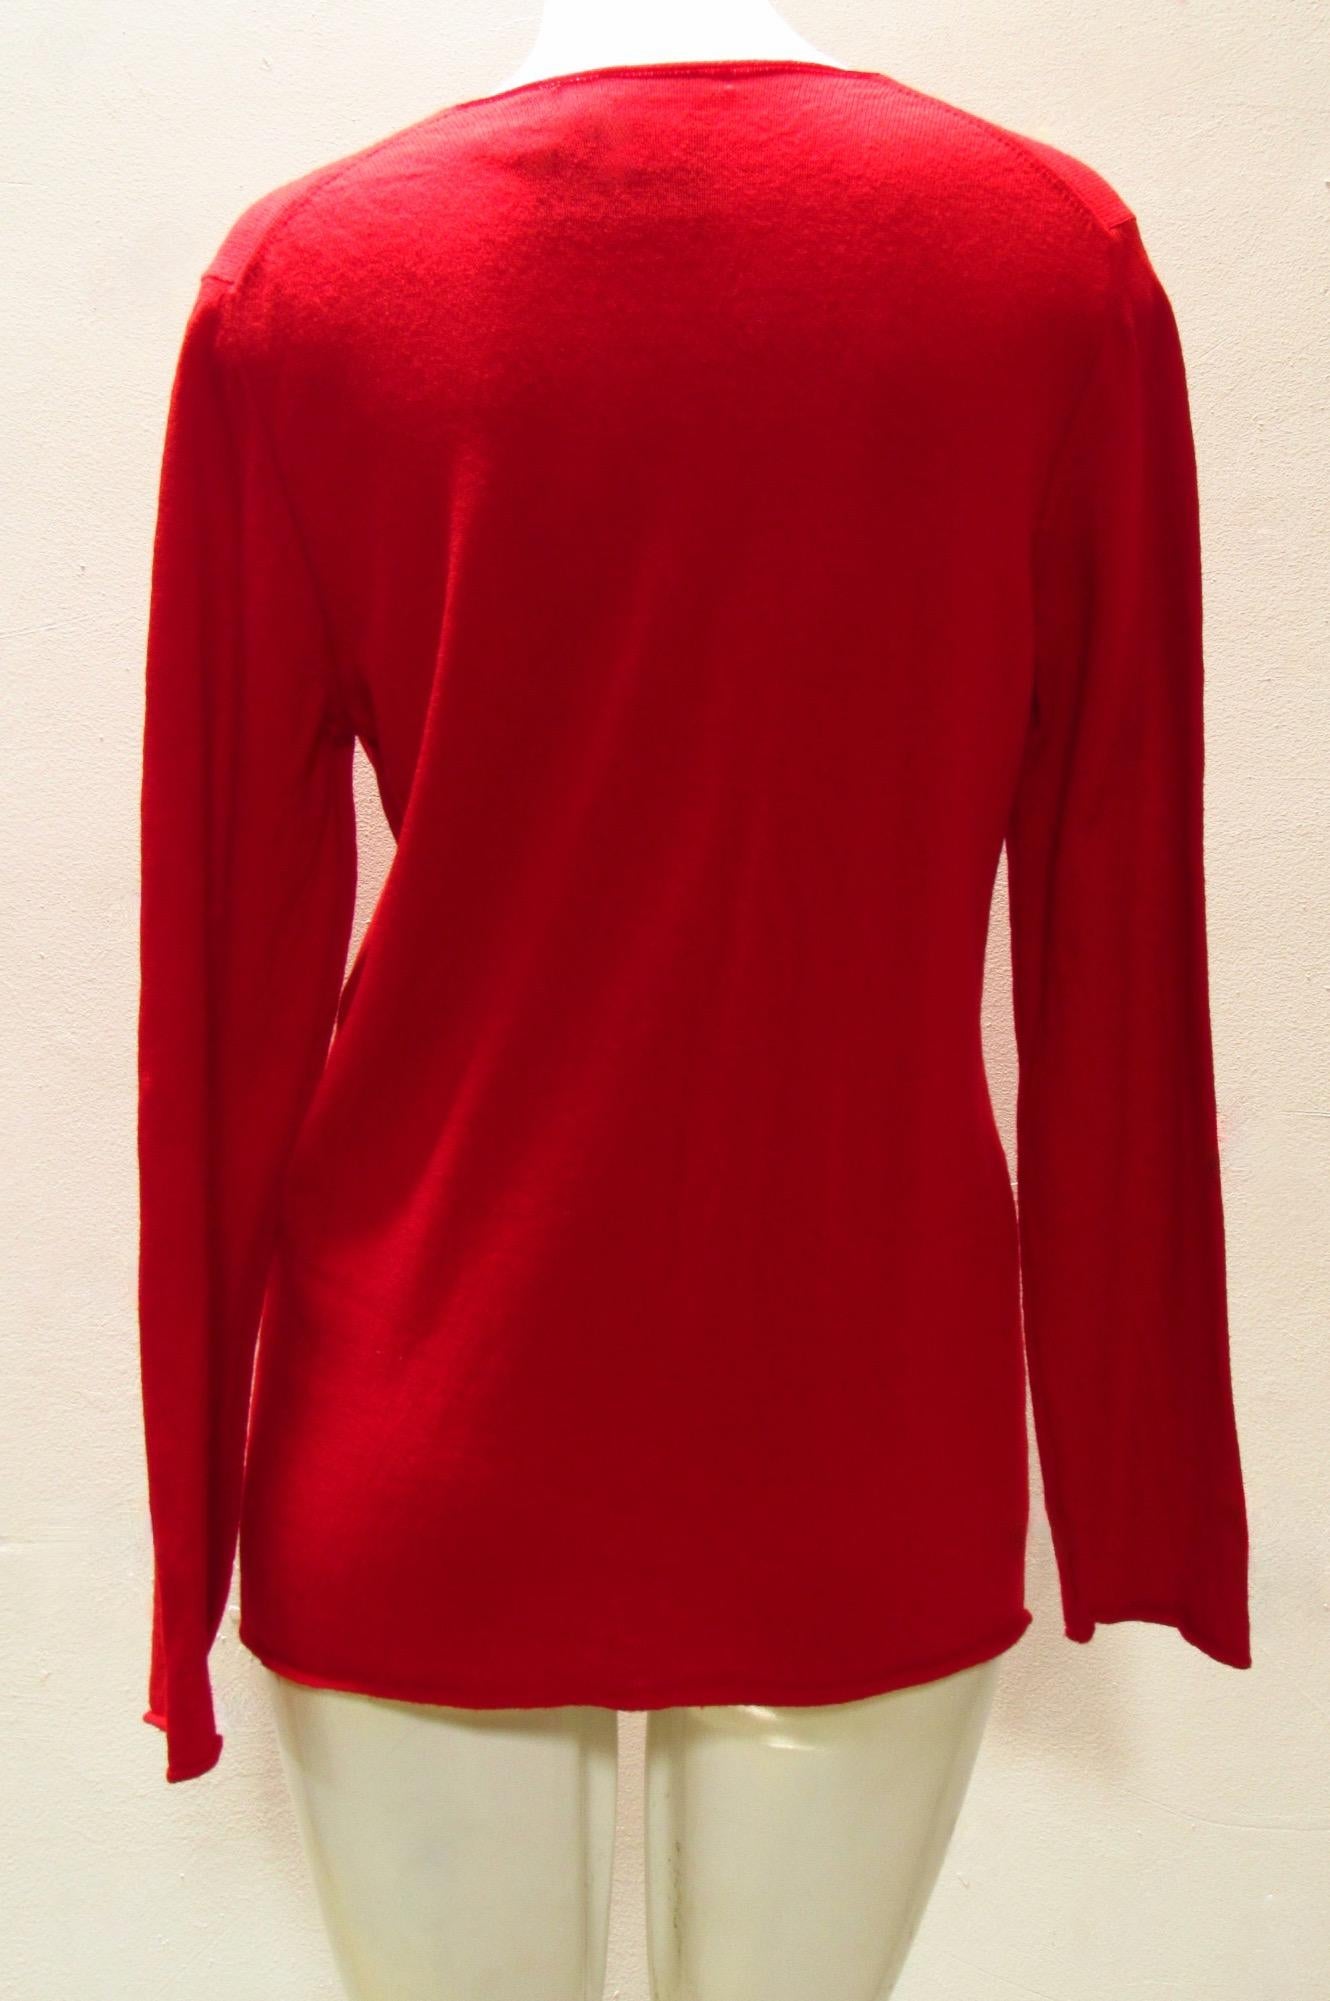 Comme Des Garçons Red Flower Sweater In New Condition For Sale In Laguna Beach, CA